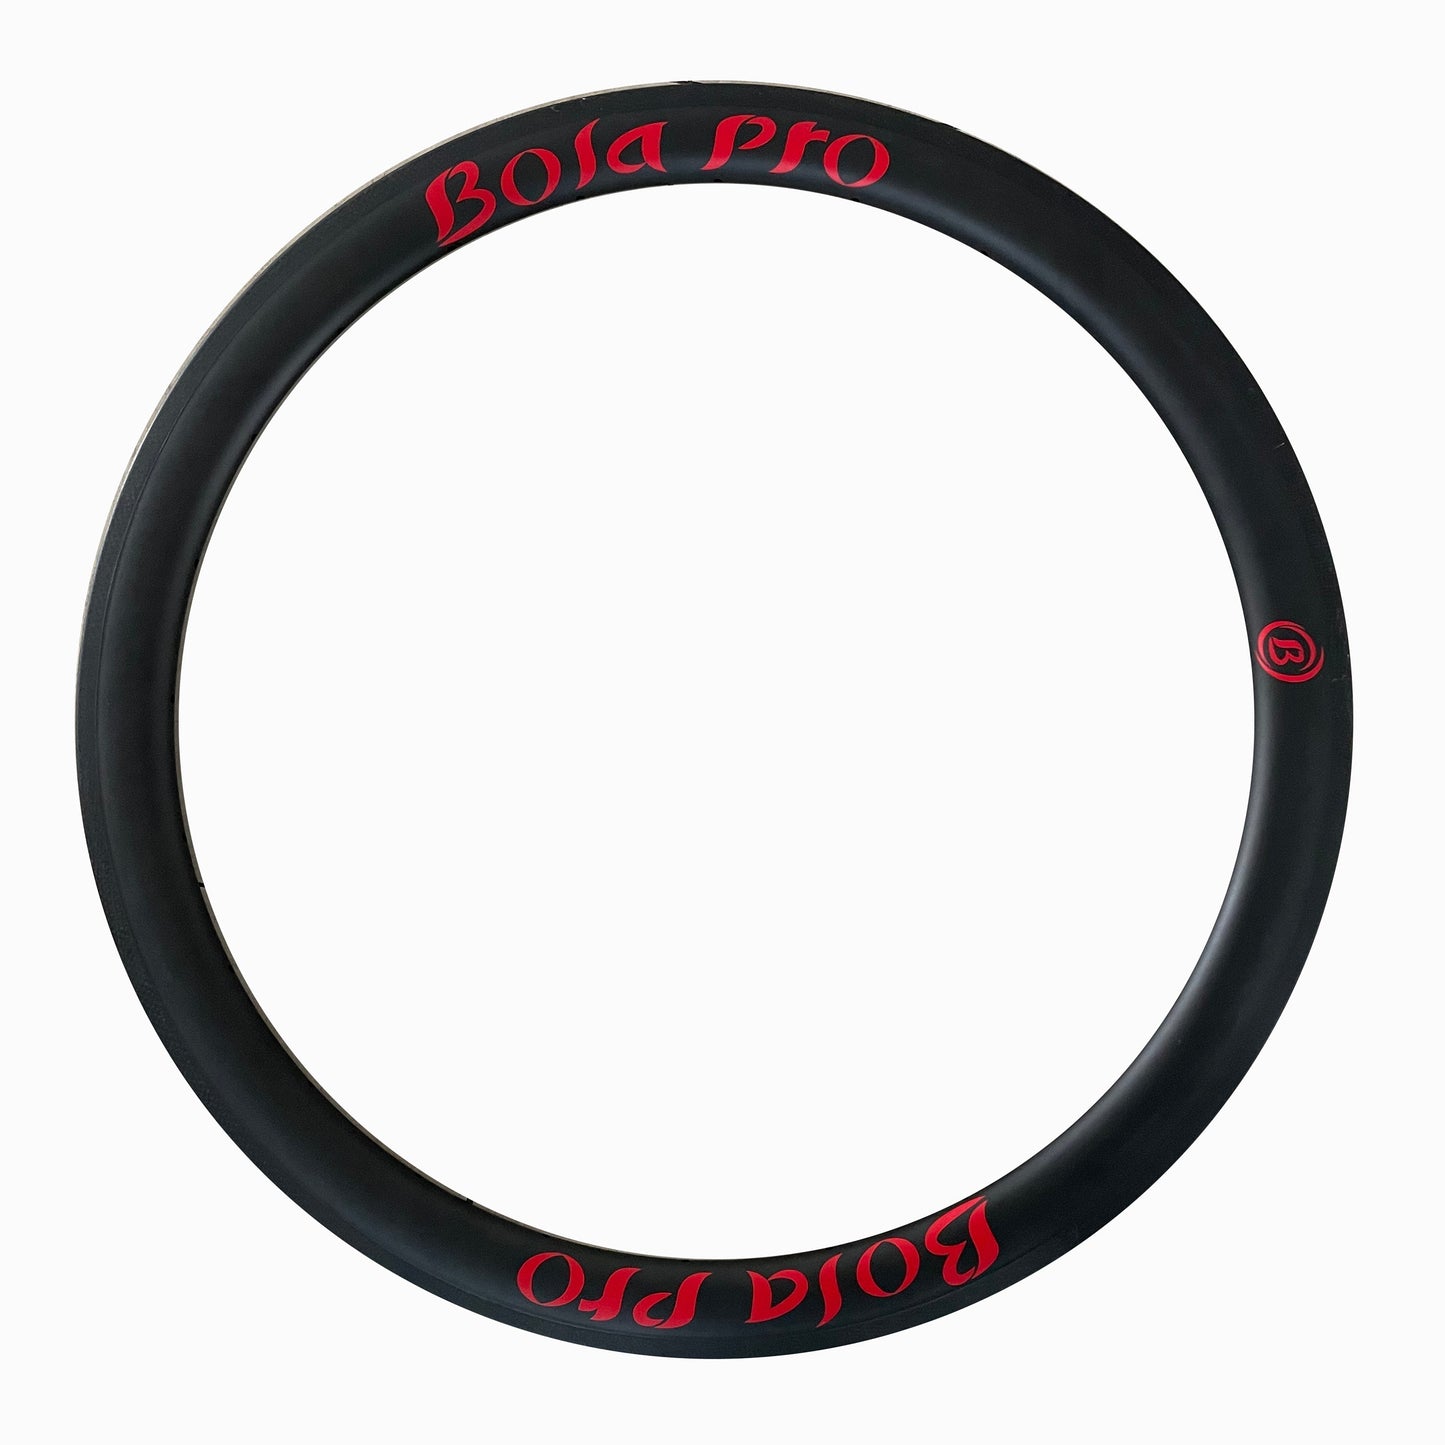 700c tubeless ready offset carbon bicycle rim 35mm high 30mm wide,hook or hookless design with 24mm or 25mm inner wide for cross-country